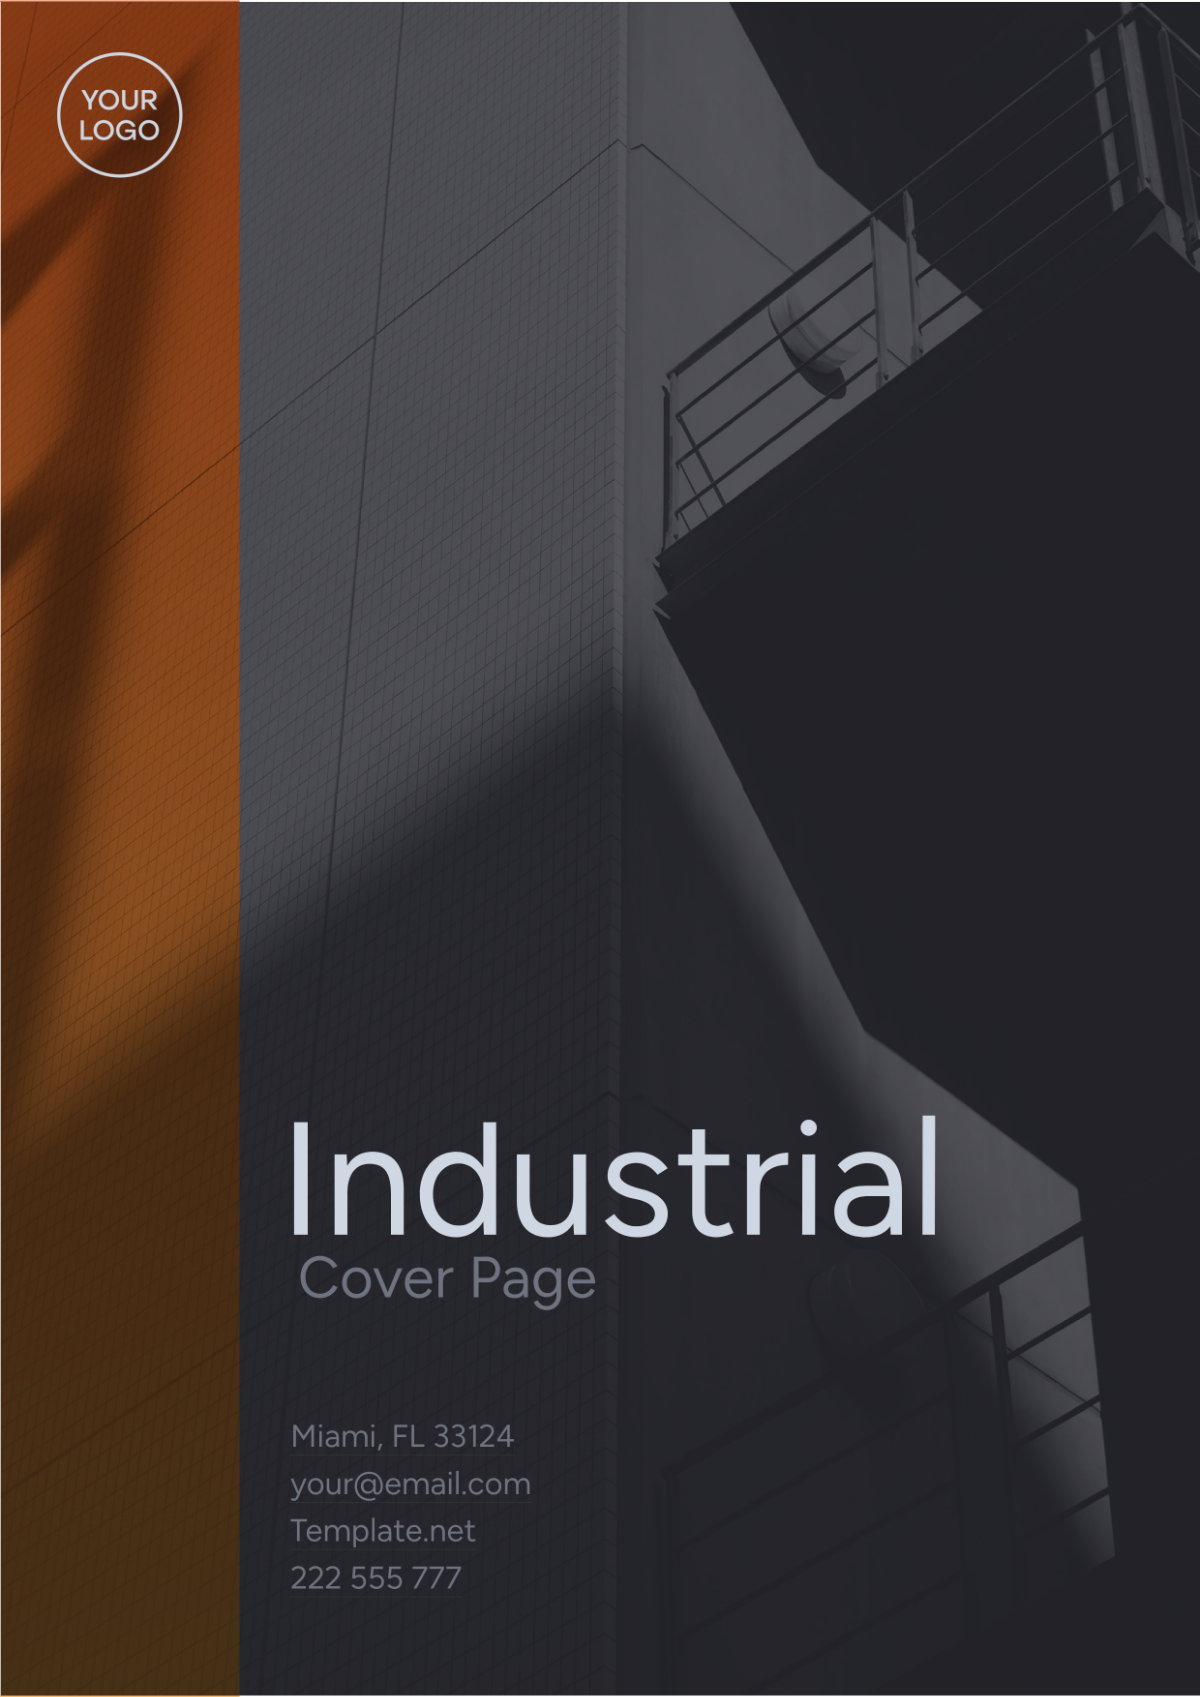 Industrial Heading Cover Page Template